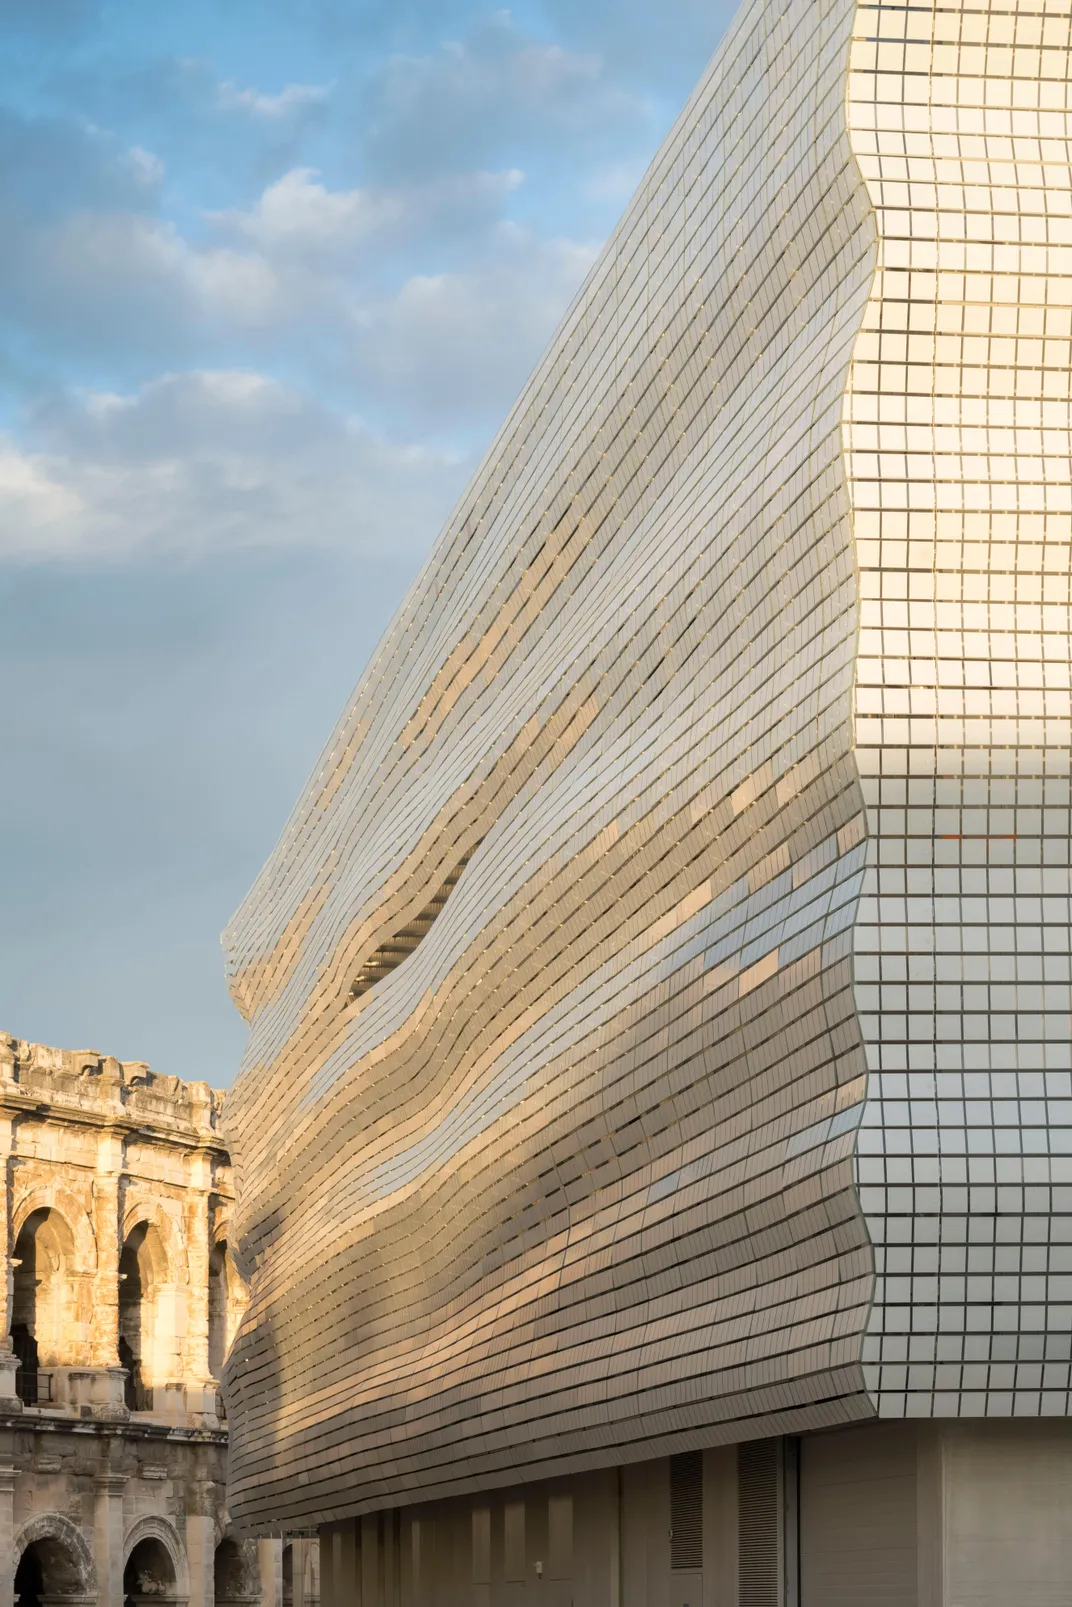 More than 6,700 glass plates ripple across the facade, reflecting its A.D. 70 neighbor.